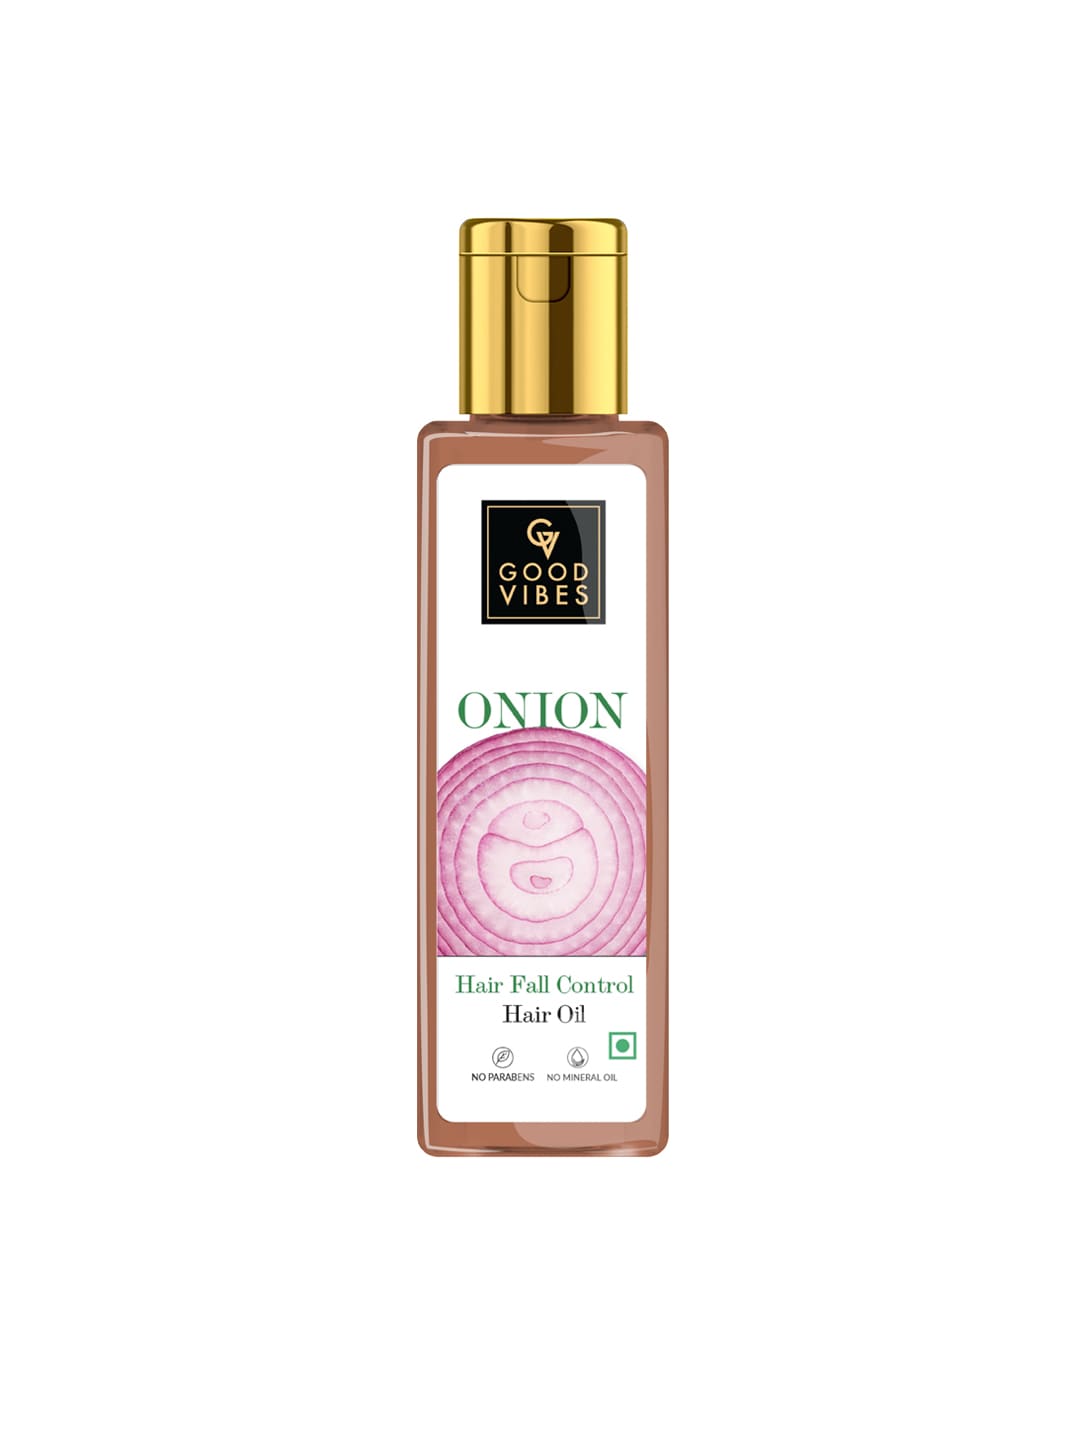 Good Vibes Onion Hairfall Control Hair Oil - 100 ml Price in India